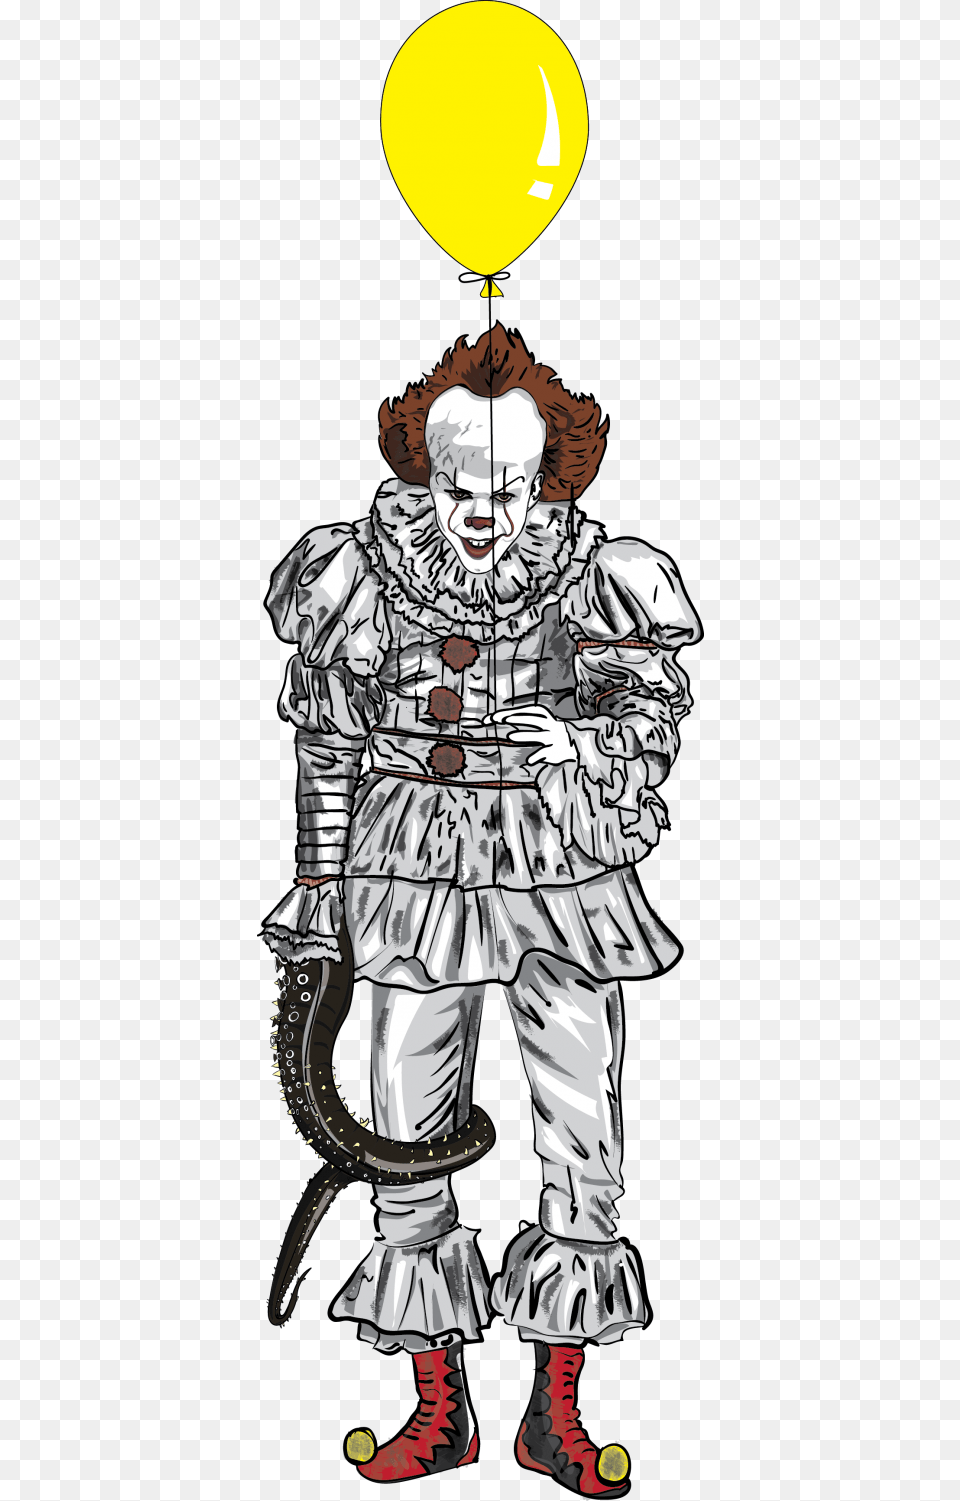 Illustration Of Pennywise The Clown From The New Movie, Publication, Book, Comics, Person Png